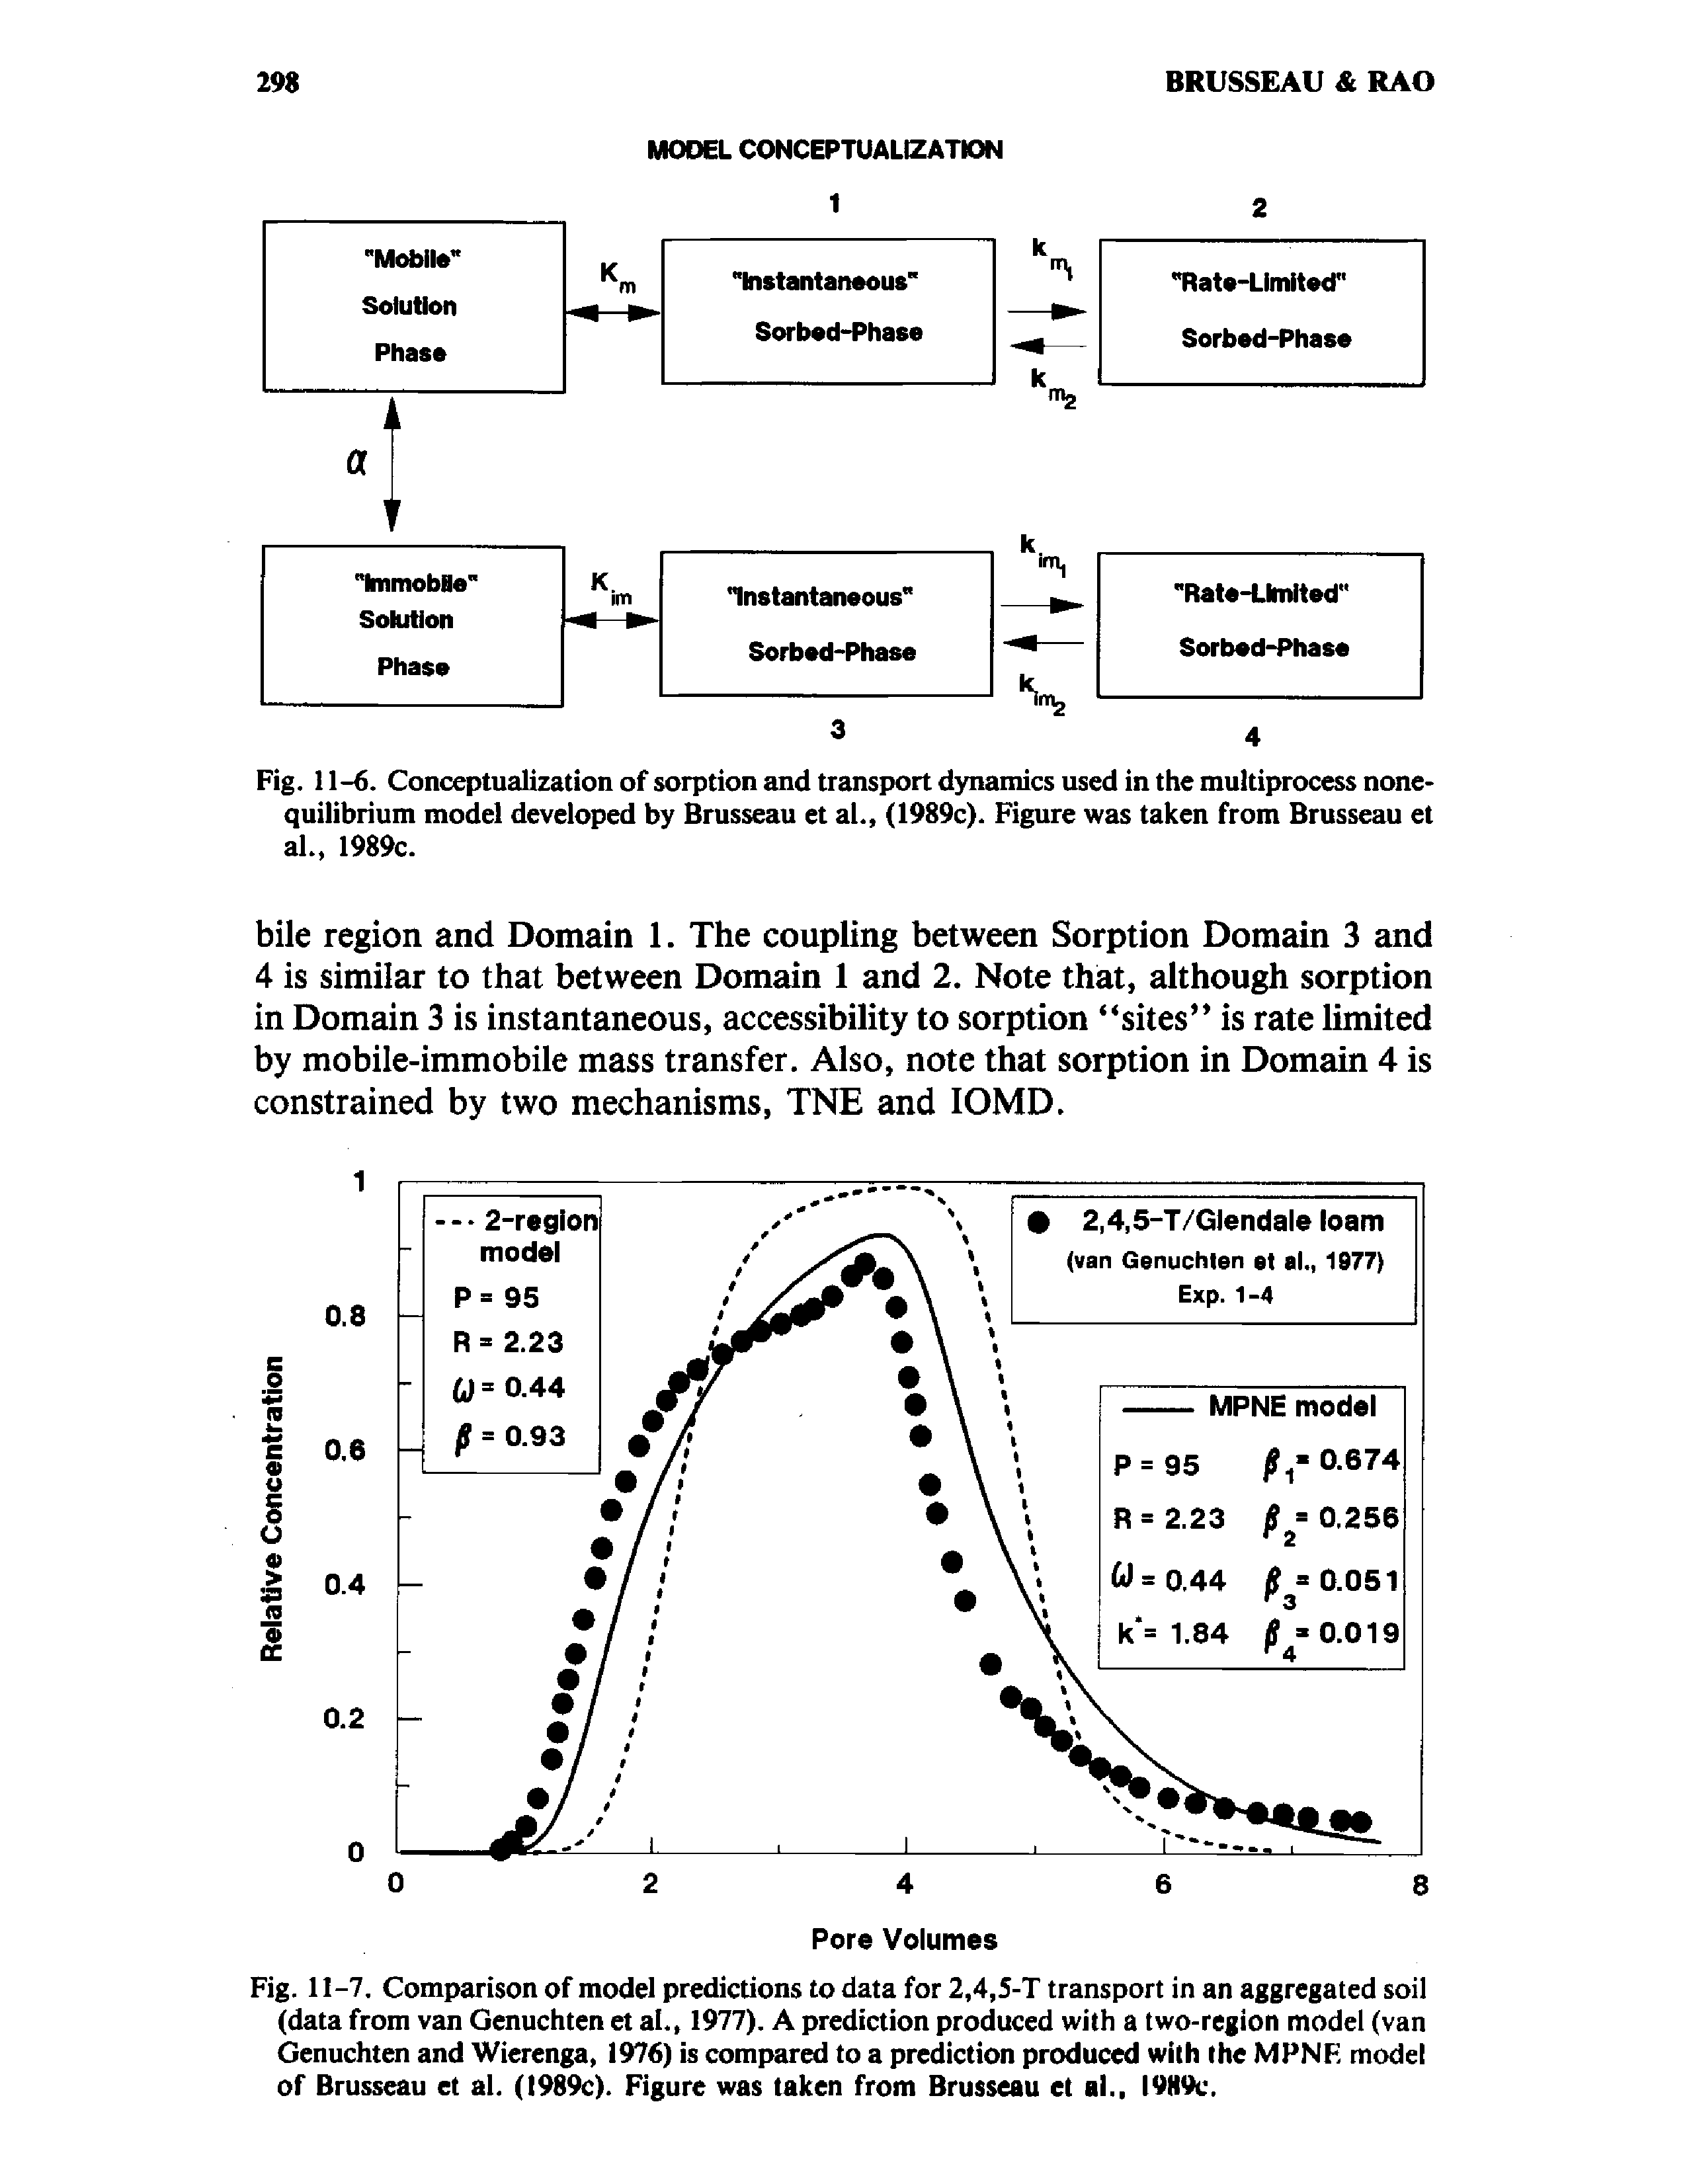 Fig. 11-6. Conceptualization of sorption and transport dynamics used in the multiprocess nonequilibrium model developed by Brusseau et al., (1989c). Figure was taken from Brusseau et al., 1989c.